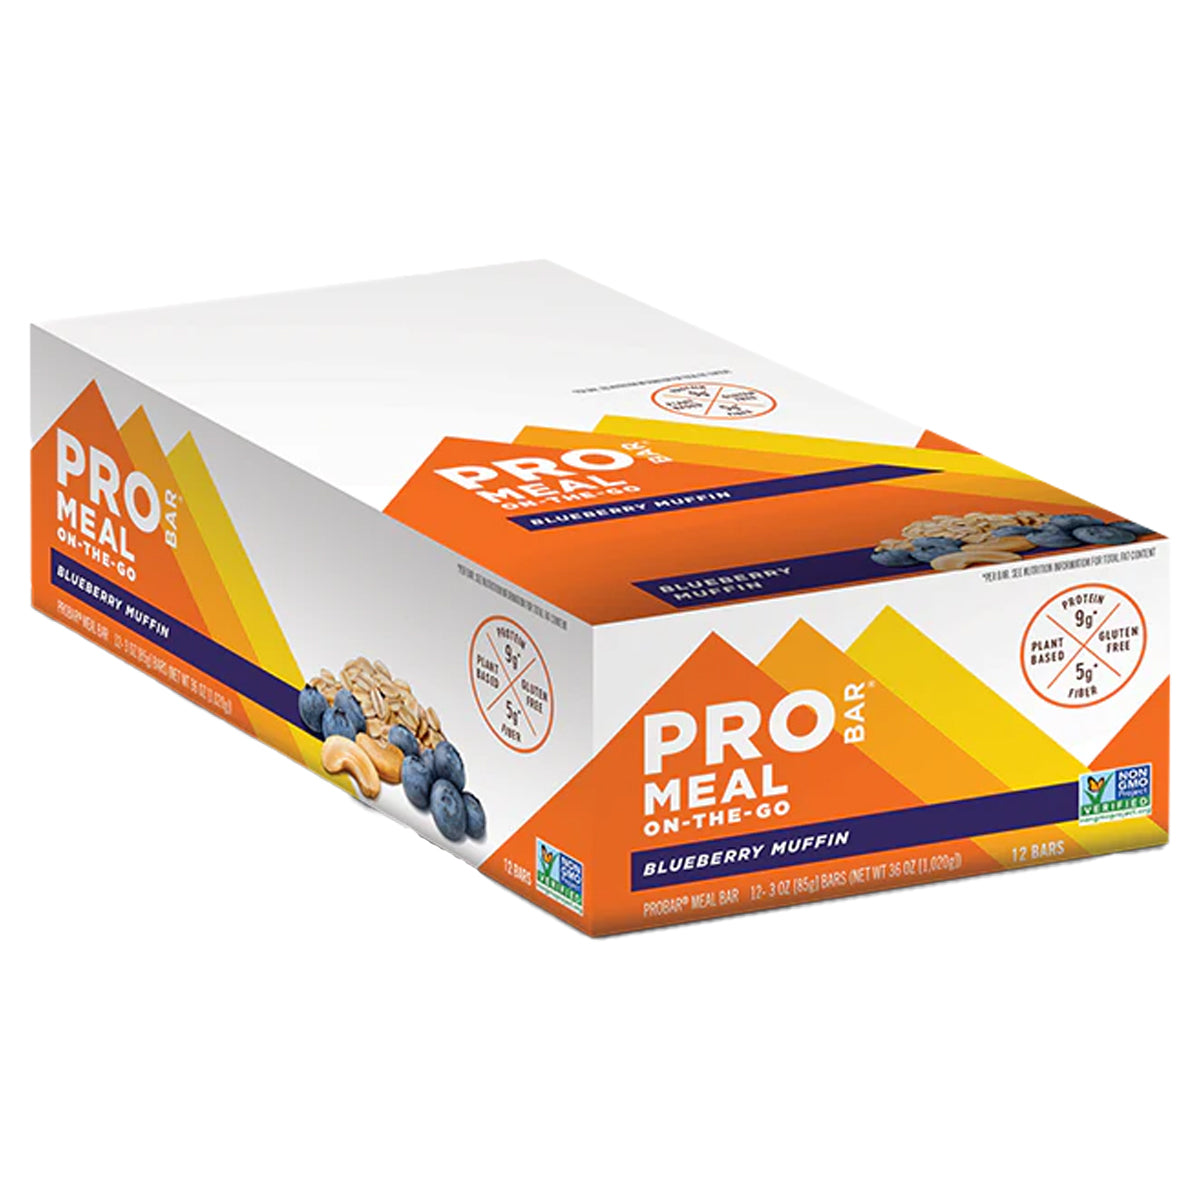 PROBAR Meal Bar in Blueberry Muffin by GOHUNT | Pro Bar - GOHUNT Shop